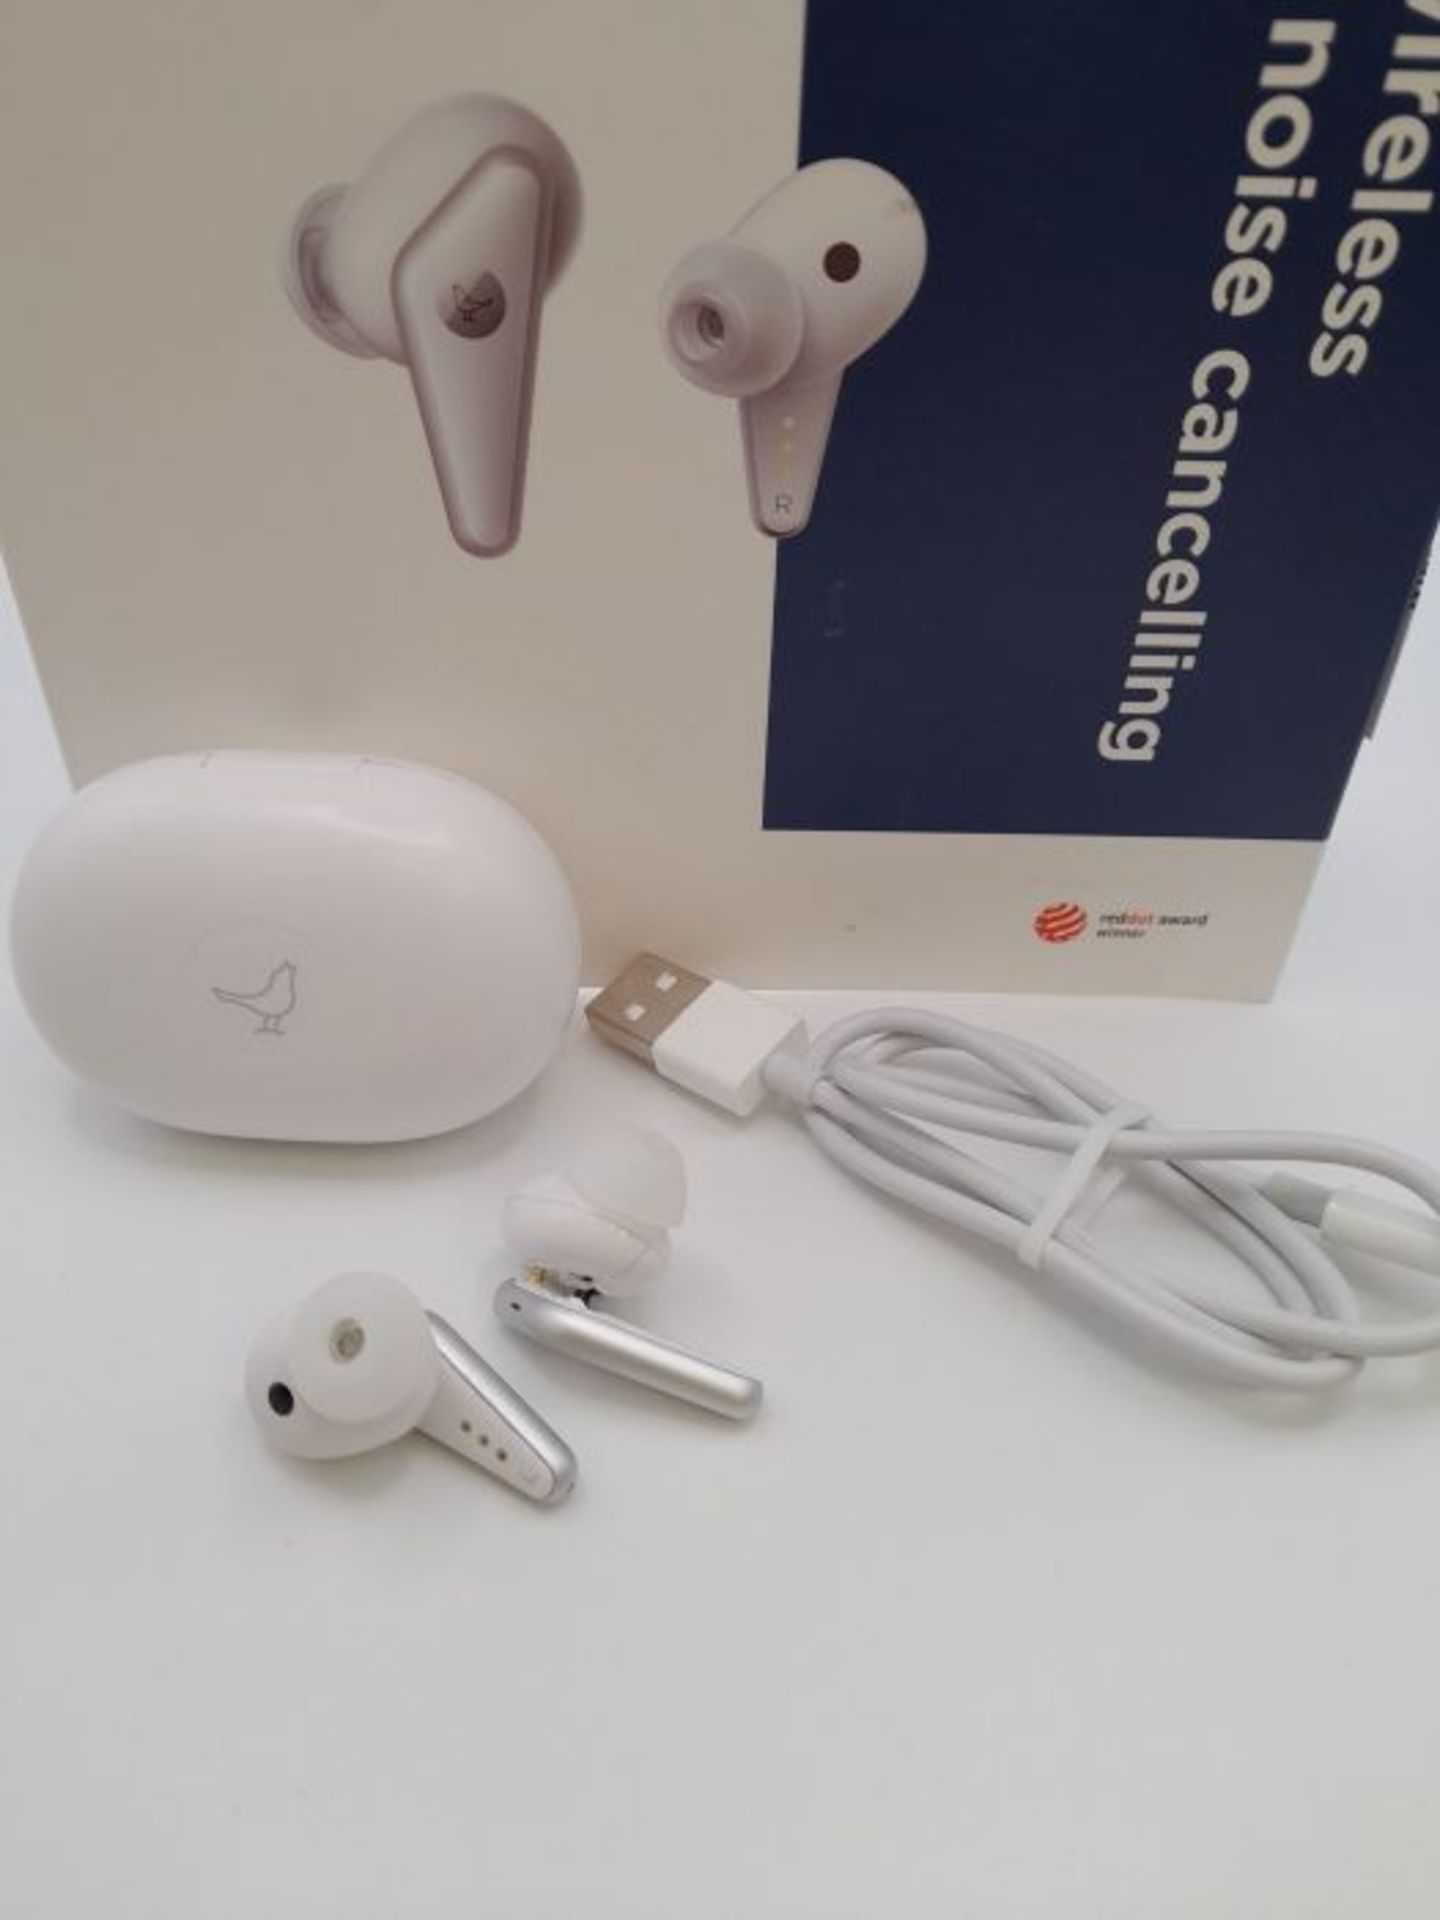 RRP £176.00 Libratone LI0080000EU6005 TRACK Air+ true wireless earbuds smart noise cancelling (24h - Image 3 of 3